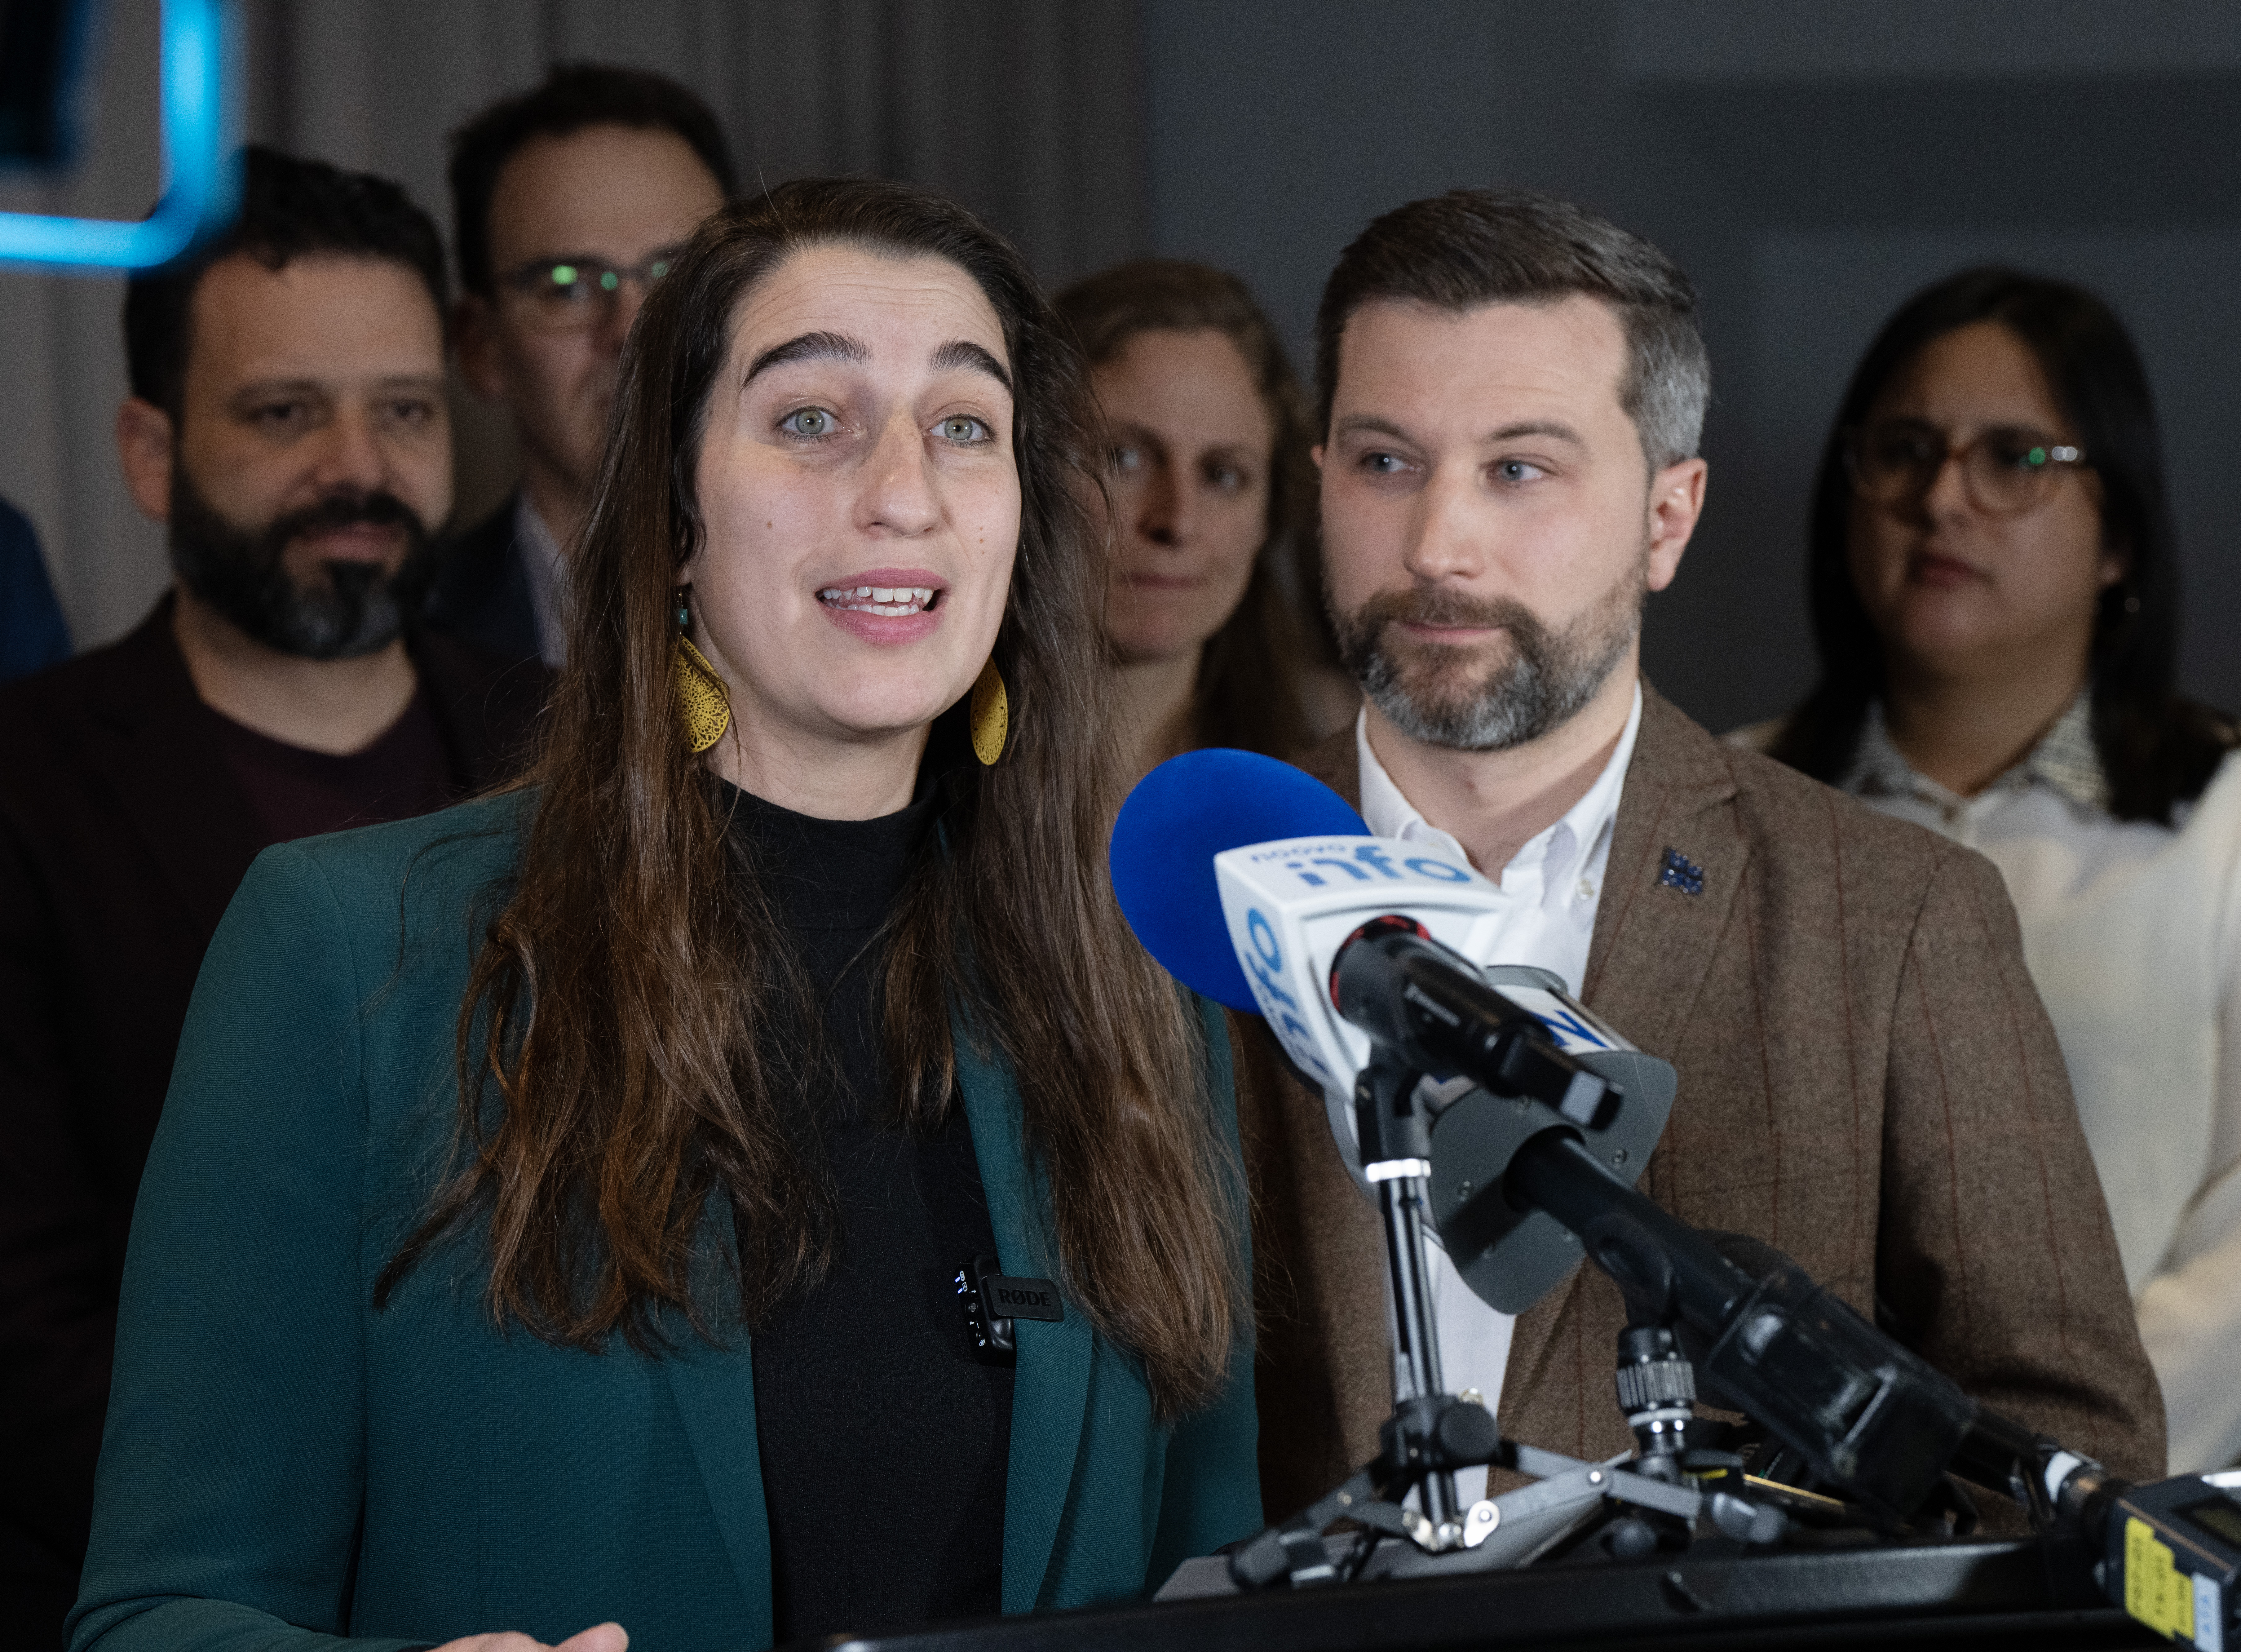 Québec solidaire co-spokesperson steps down, citing mental health concerns, issues within party